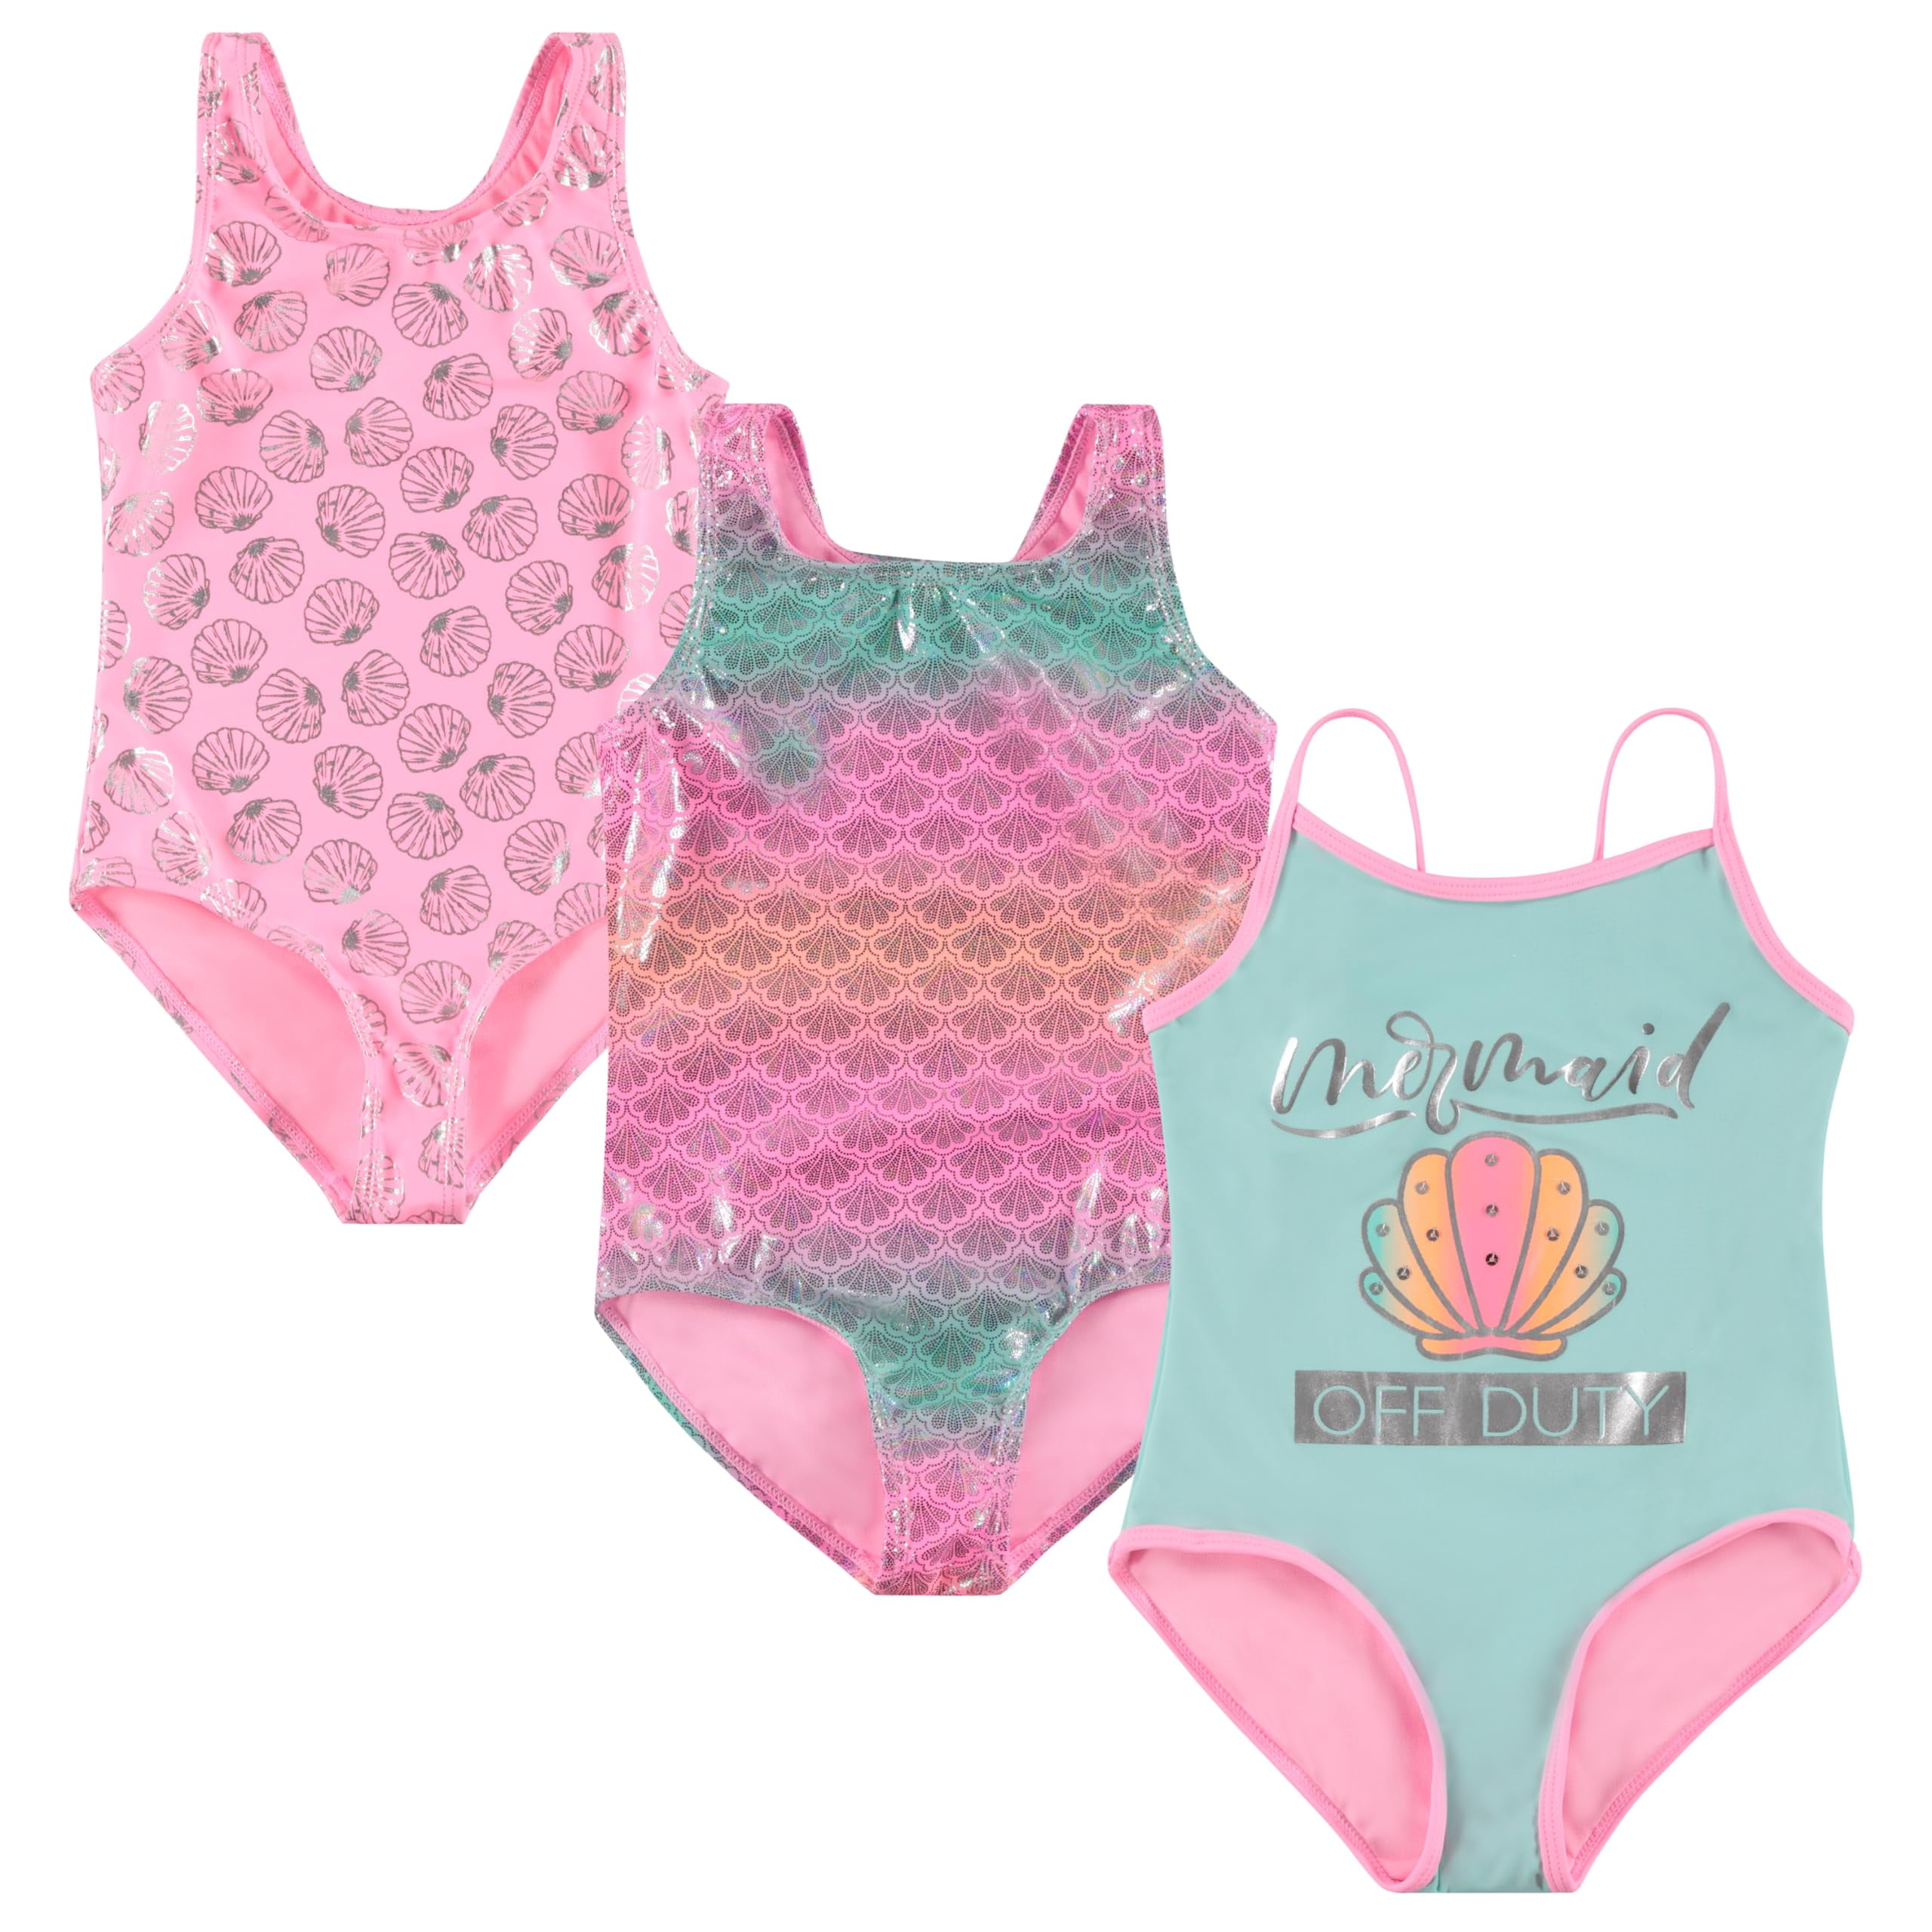 Btween Girls Multi Pack One Piece Swimwear - Unique Colors and Patterns,  Sizes 4-16 for Kids and Toddlers 